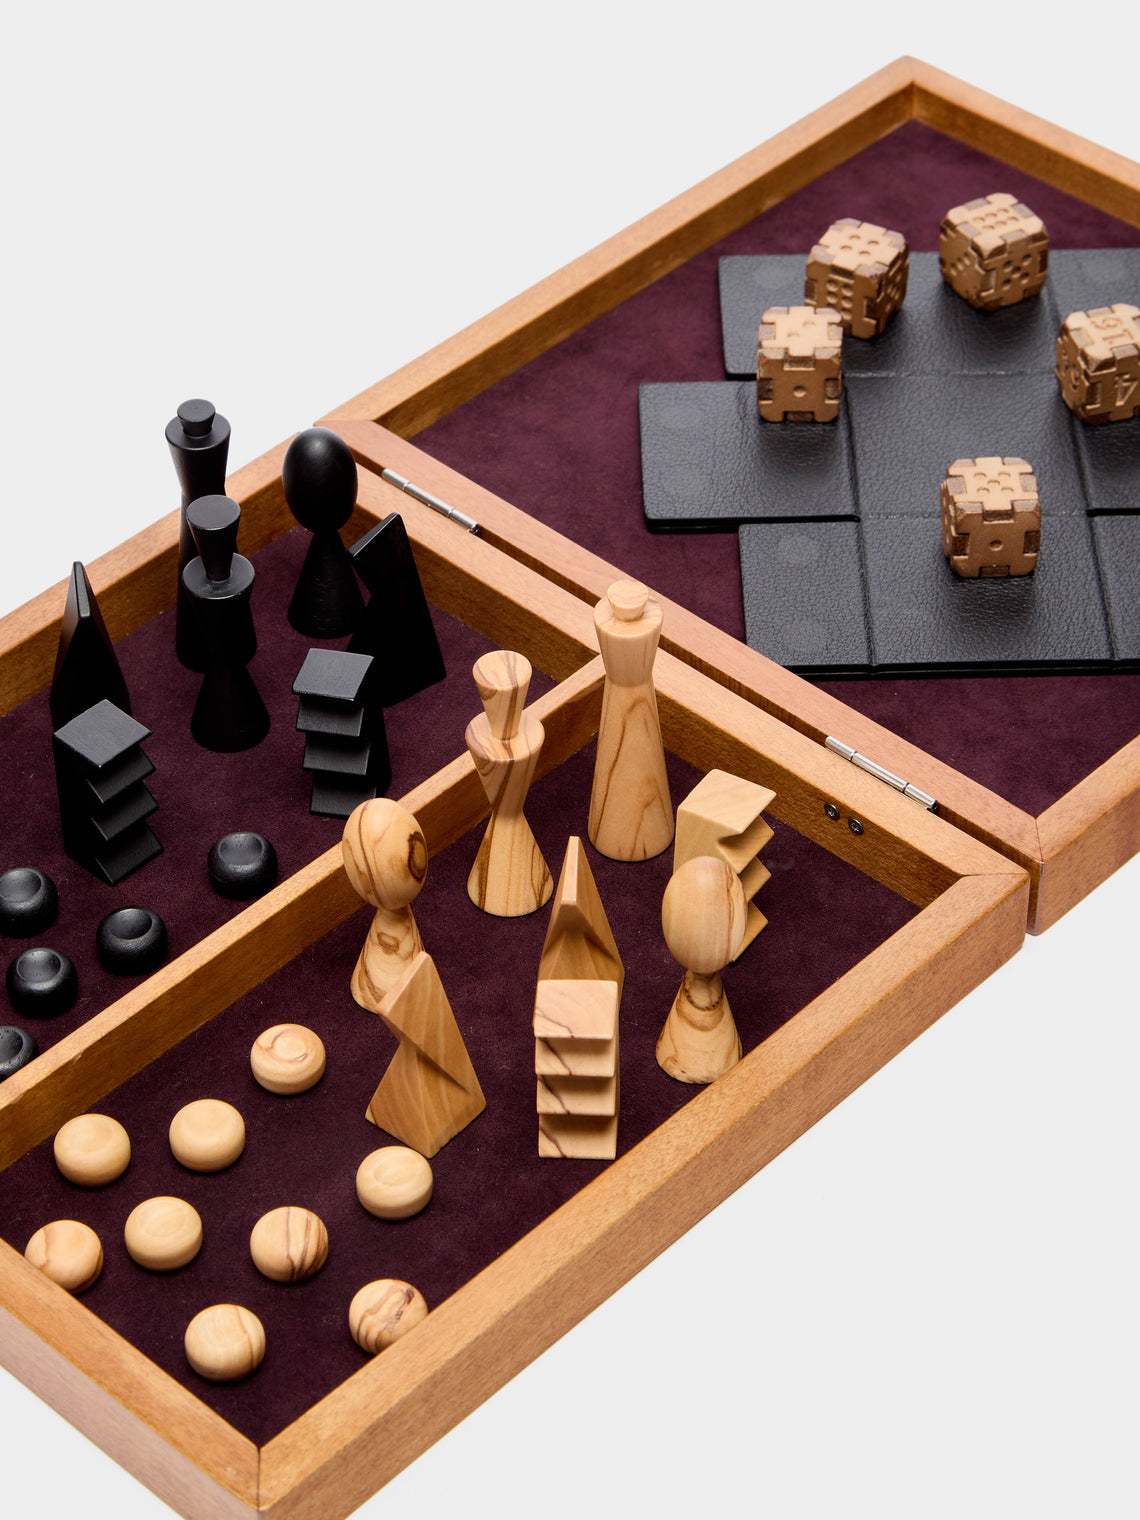 Métier - Wood and Leather Travel Chess and Backgammon Set -  - ABASK